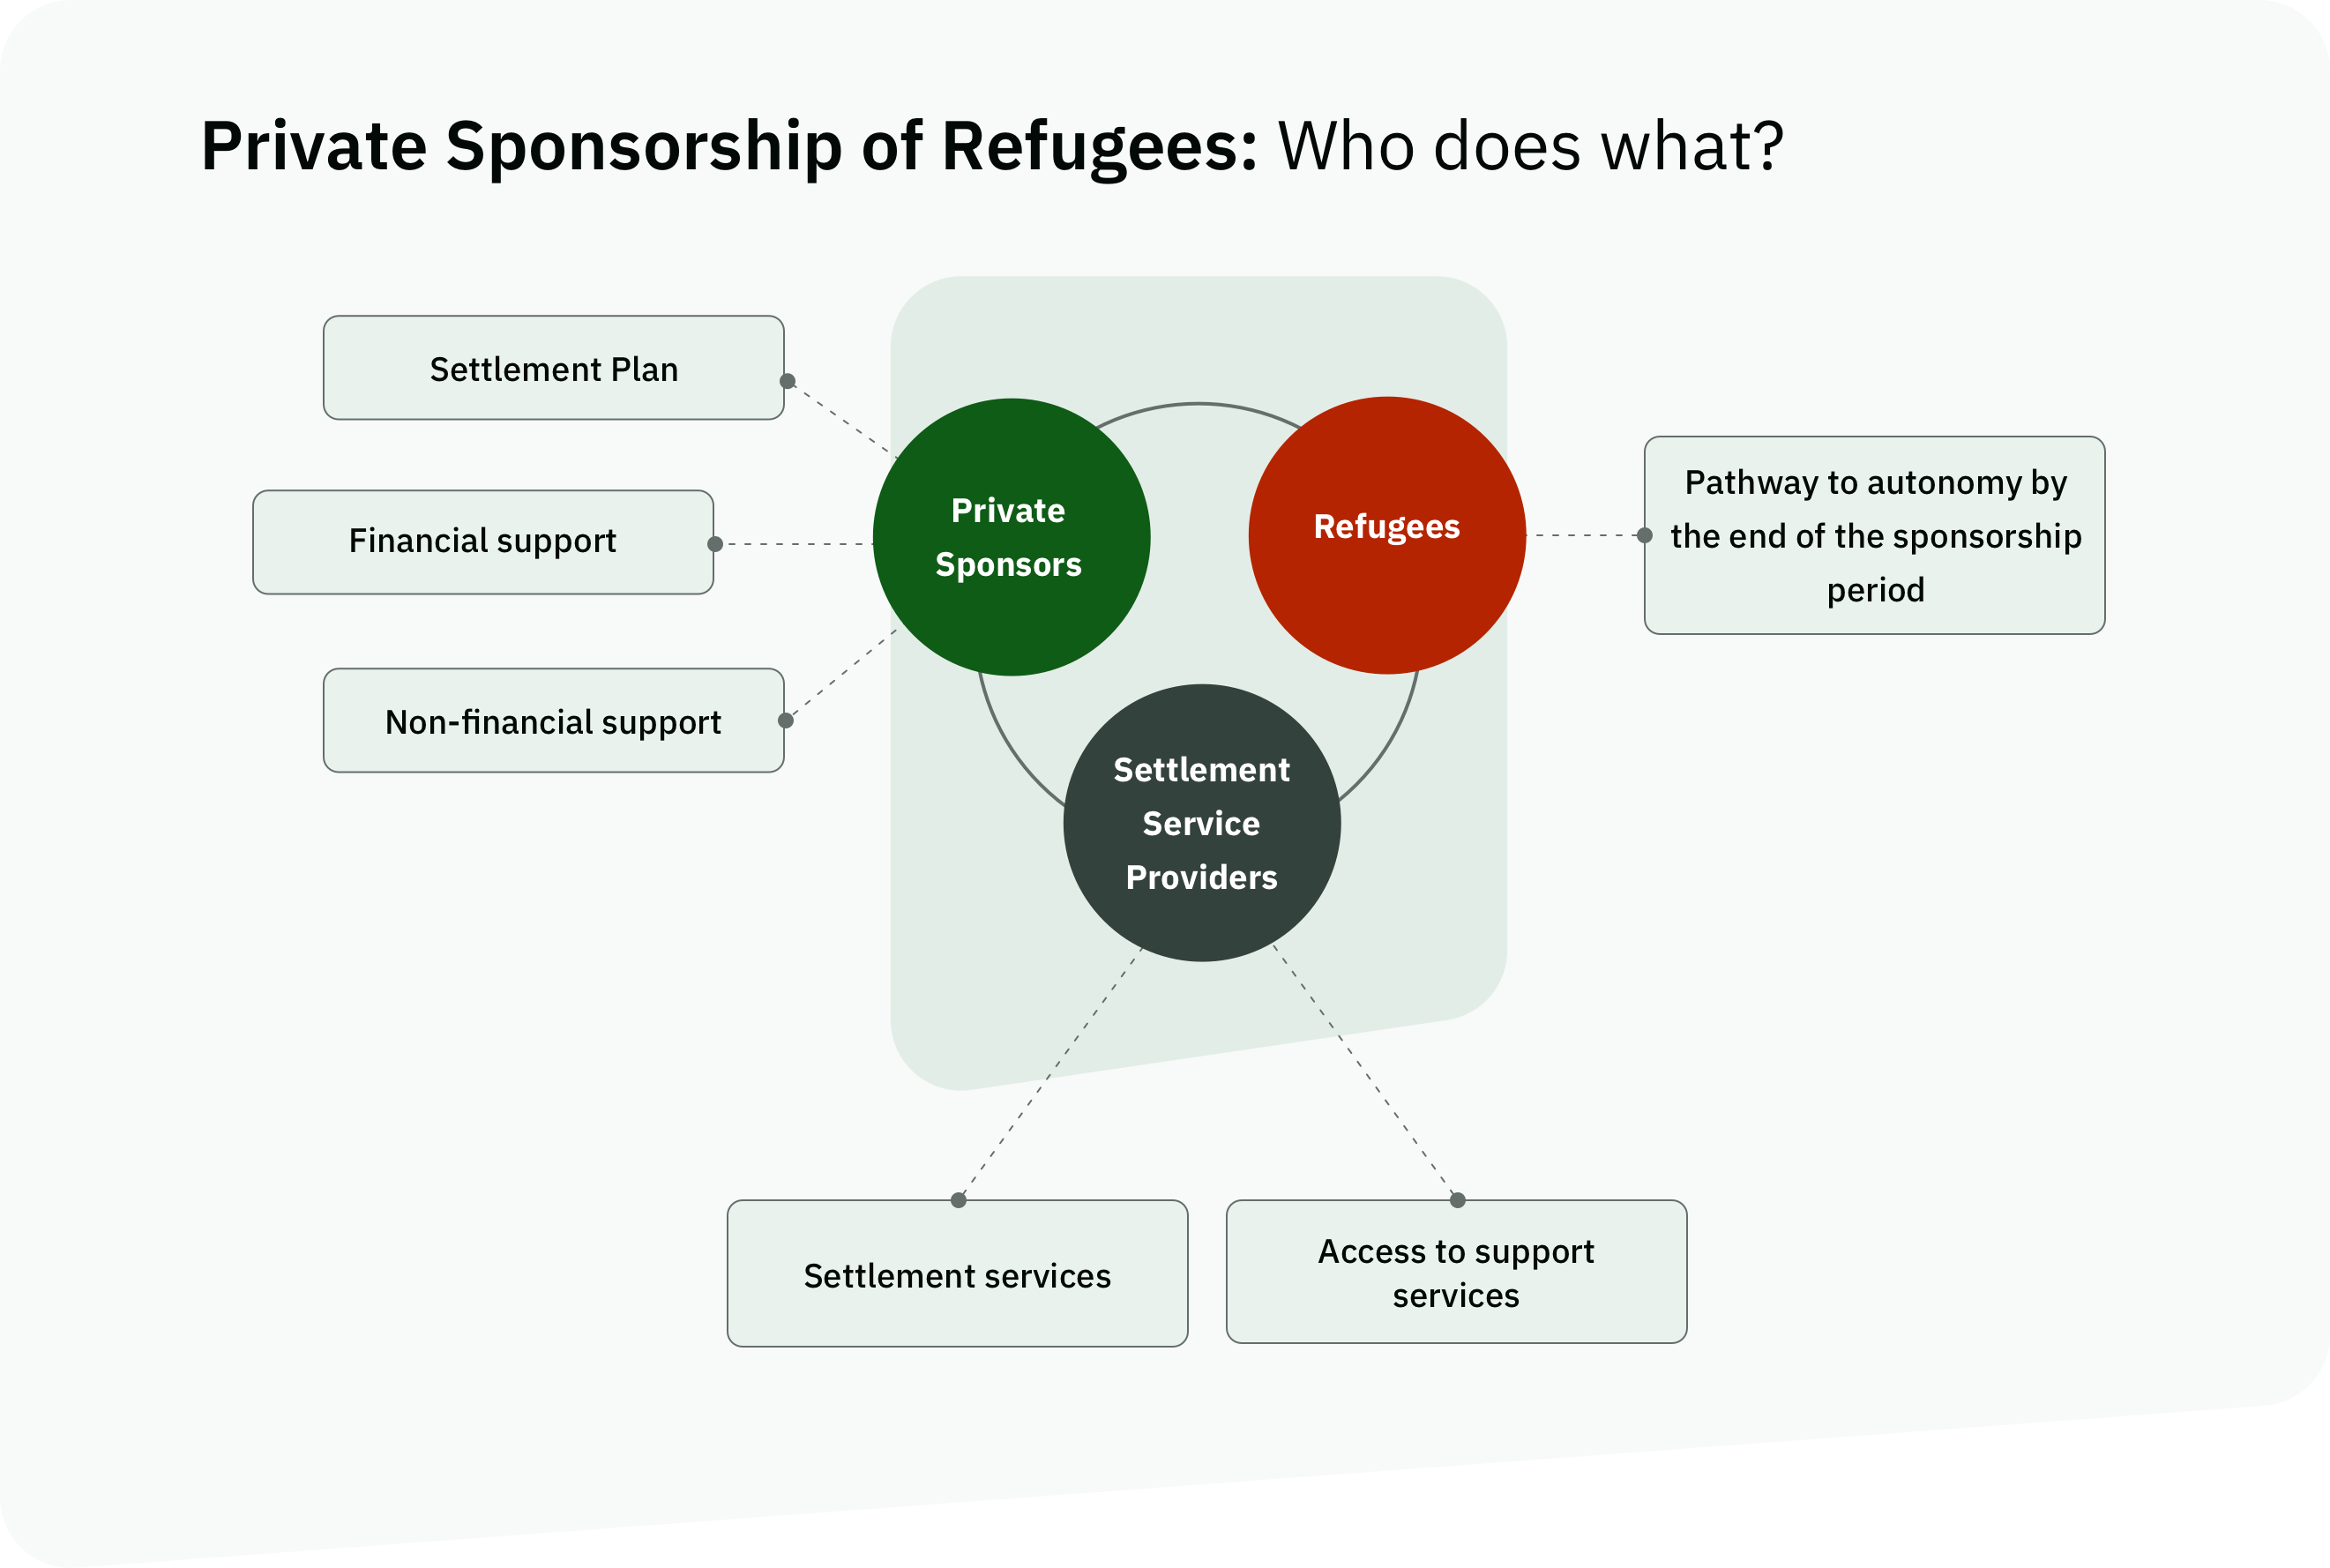 Diagram summarizing who does what in the private sponsorship of refugees